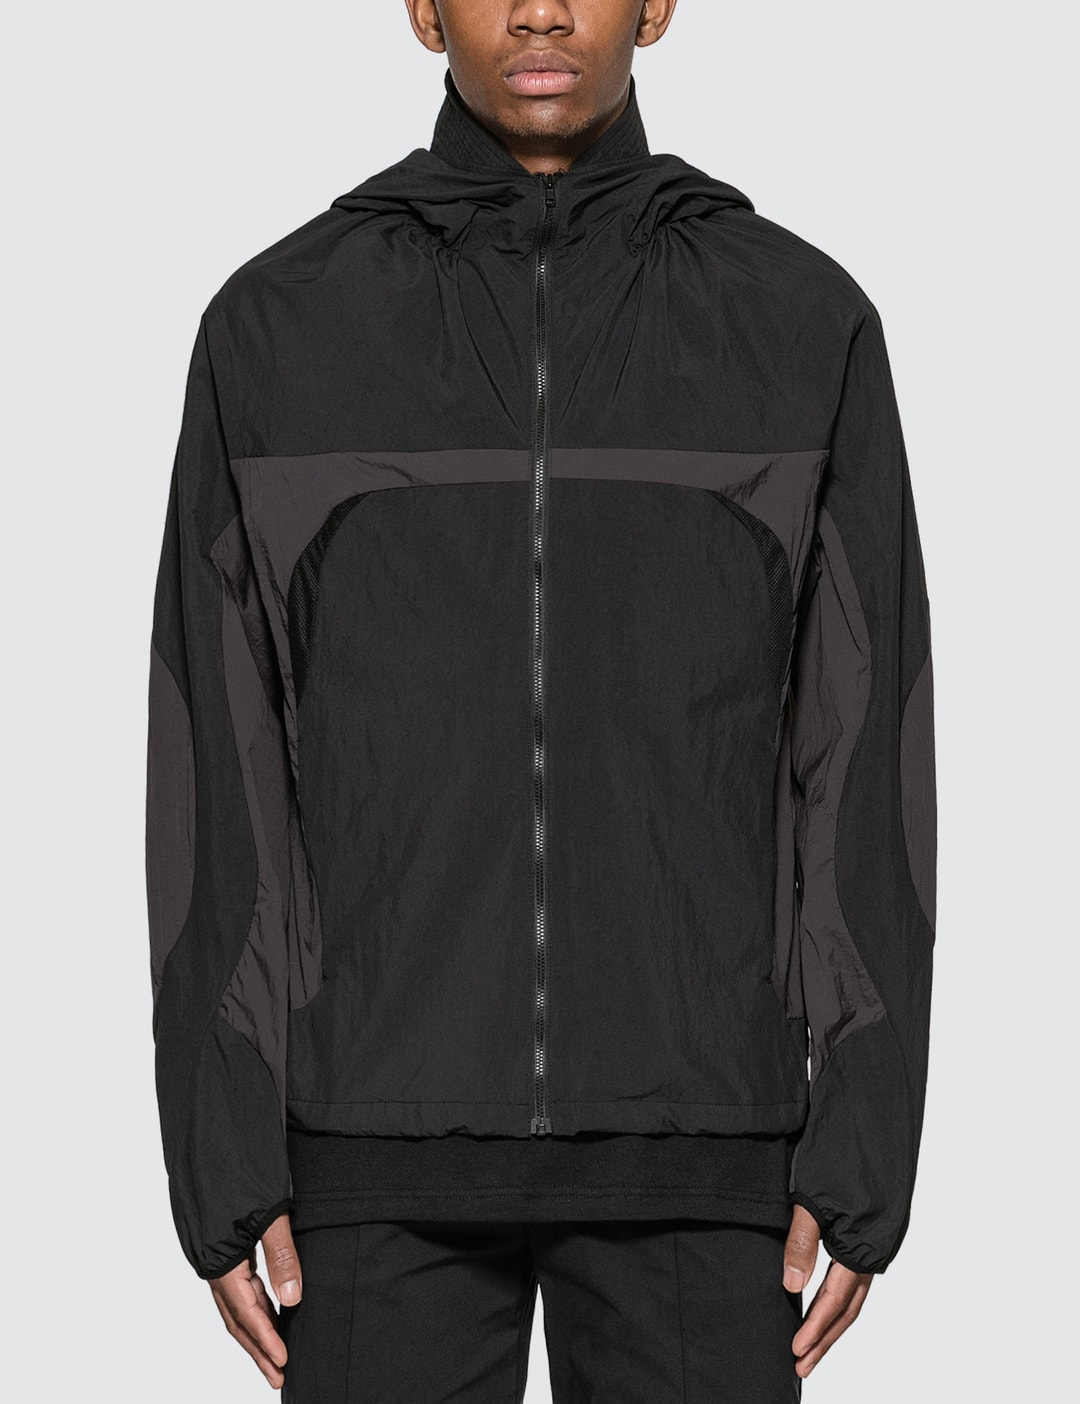 POST ARCHIVE FACTION (PAF) - 3.0 Technical Jacket Right | HBX ...